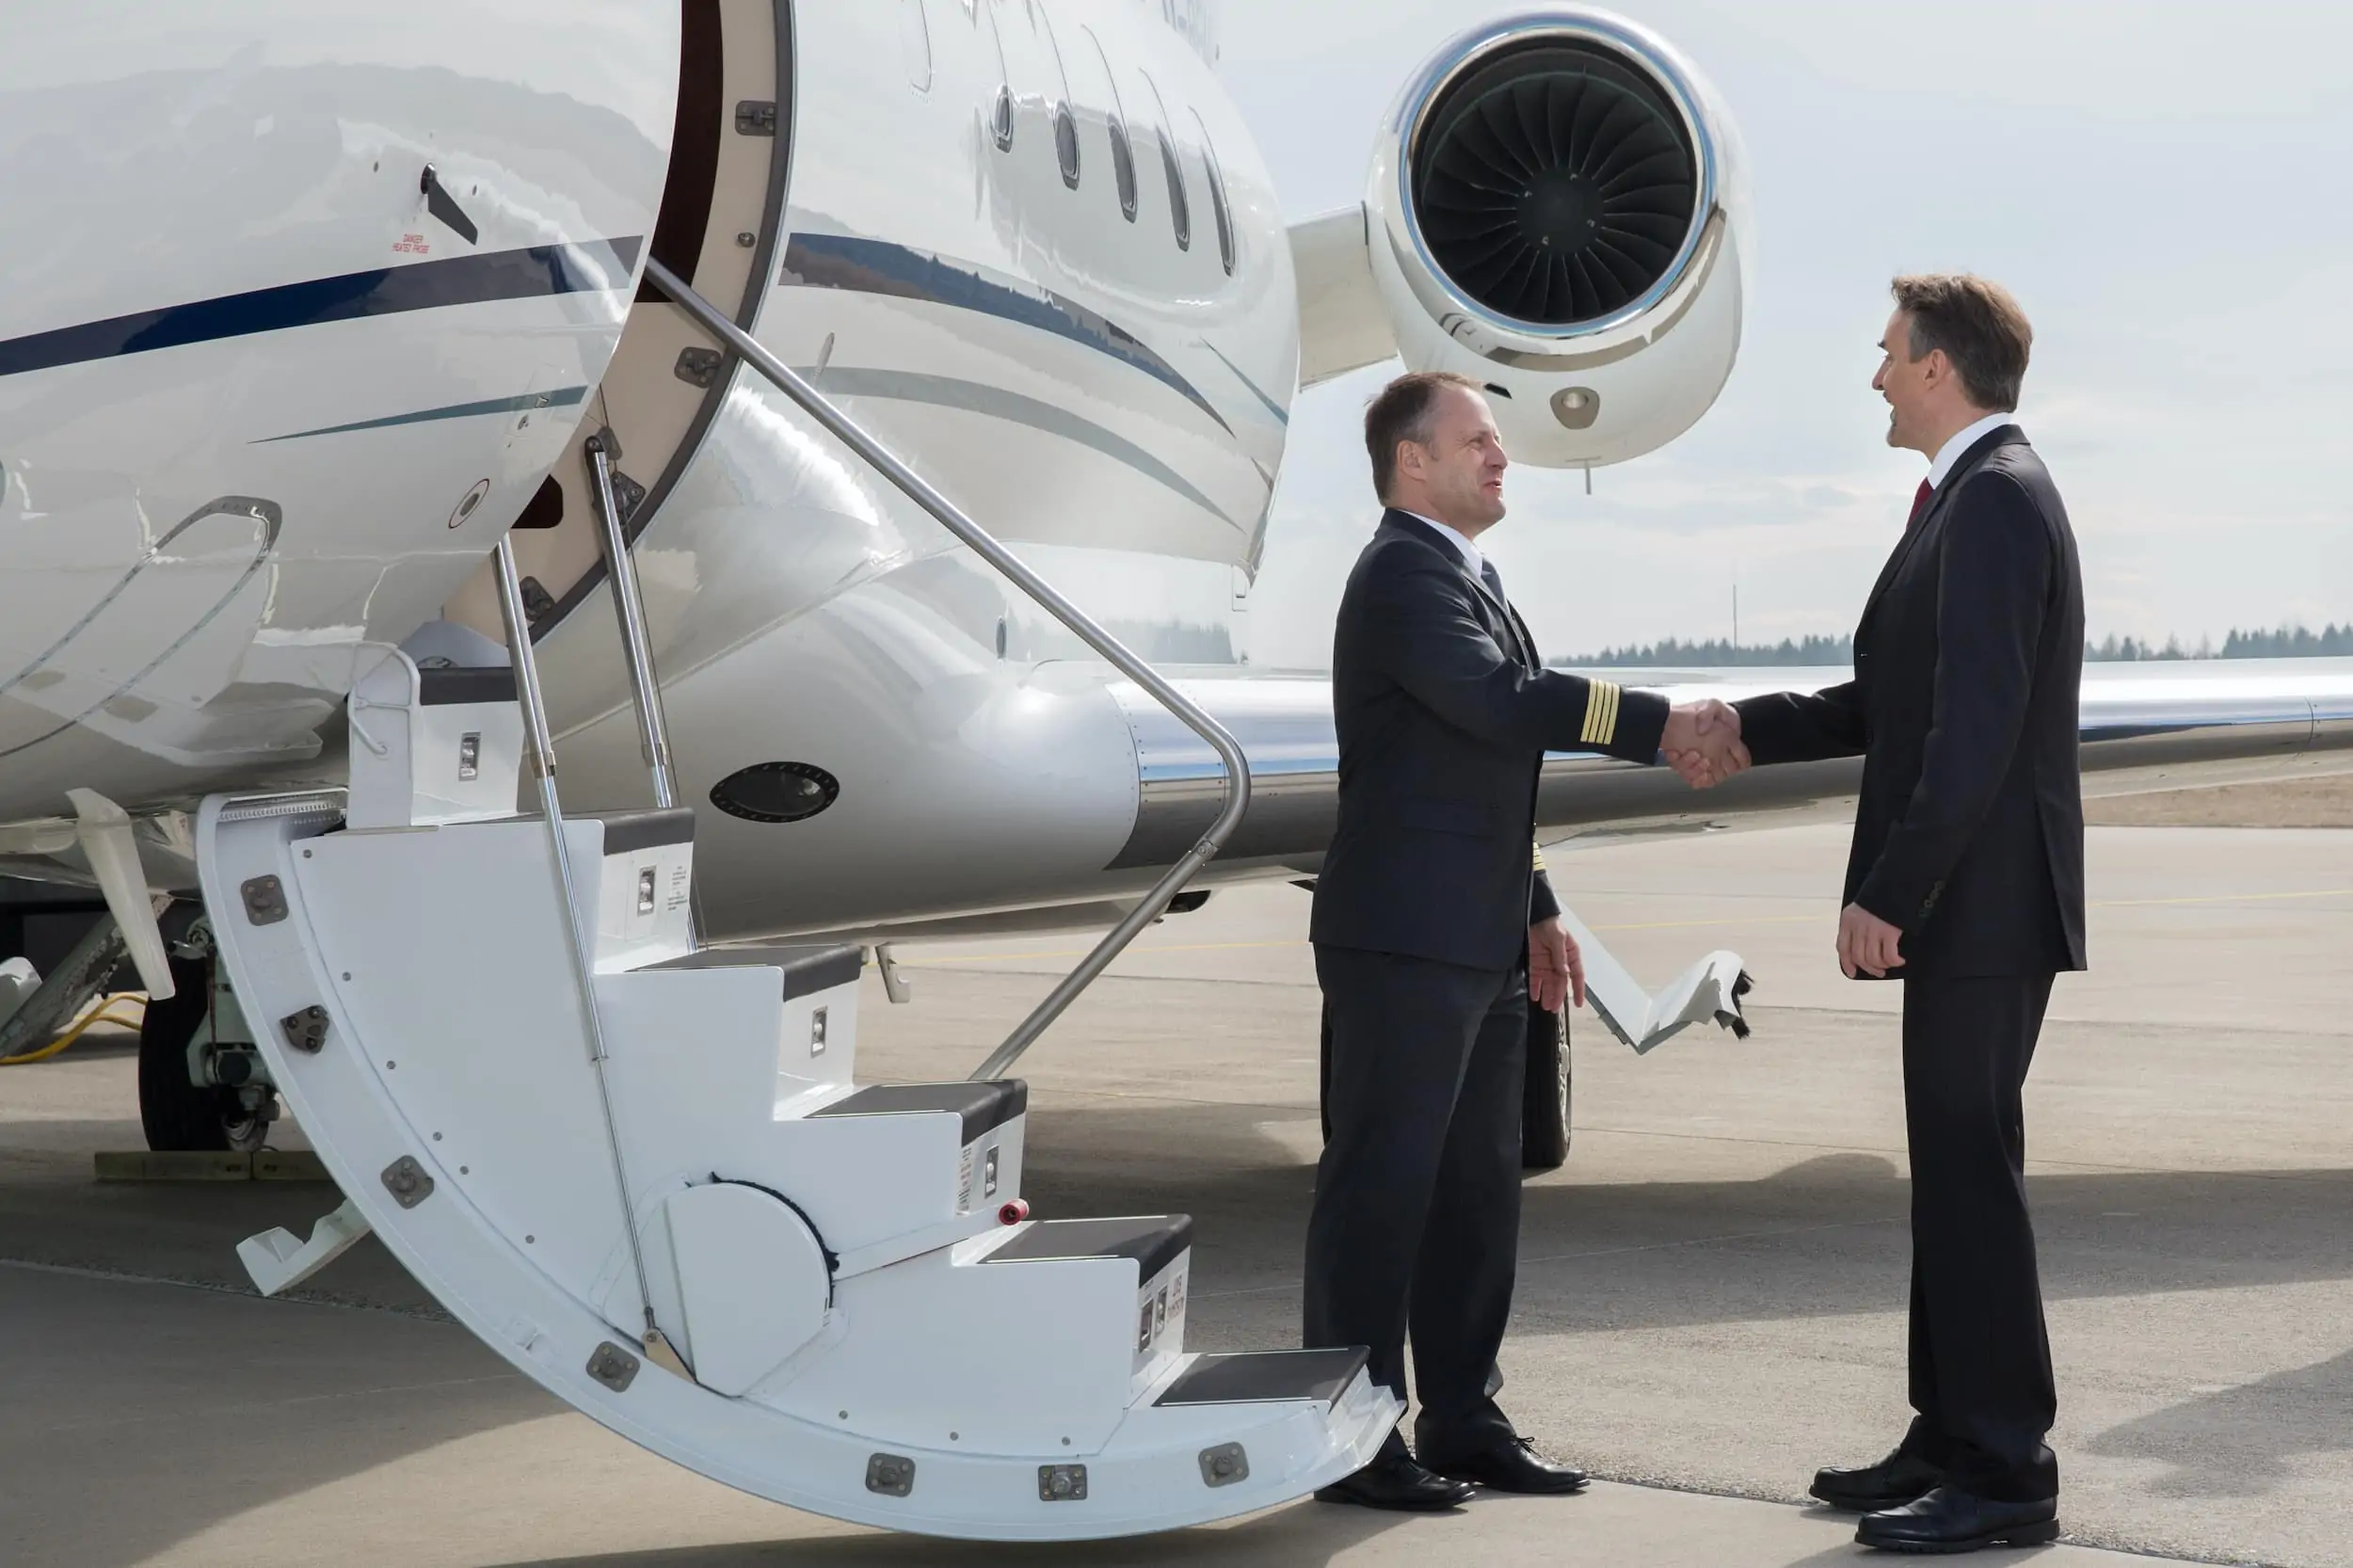 Pilot shaking hand with private jet ownership exterior